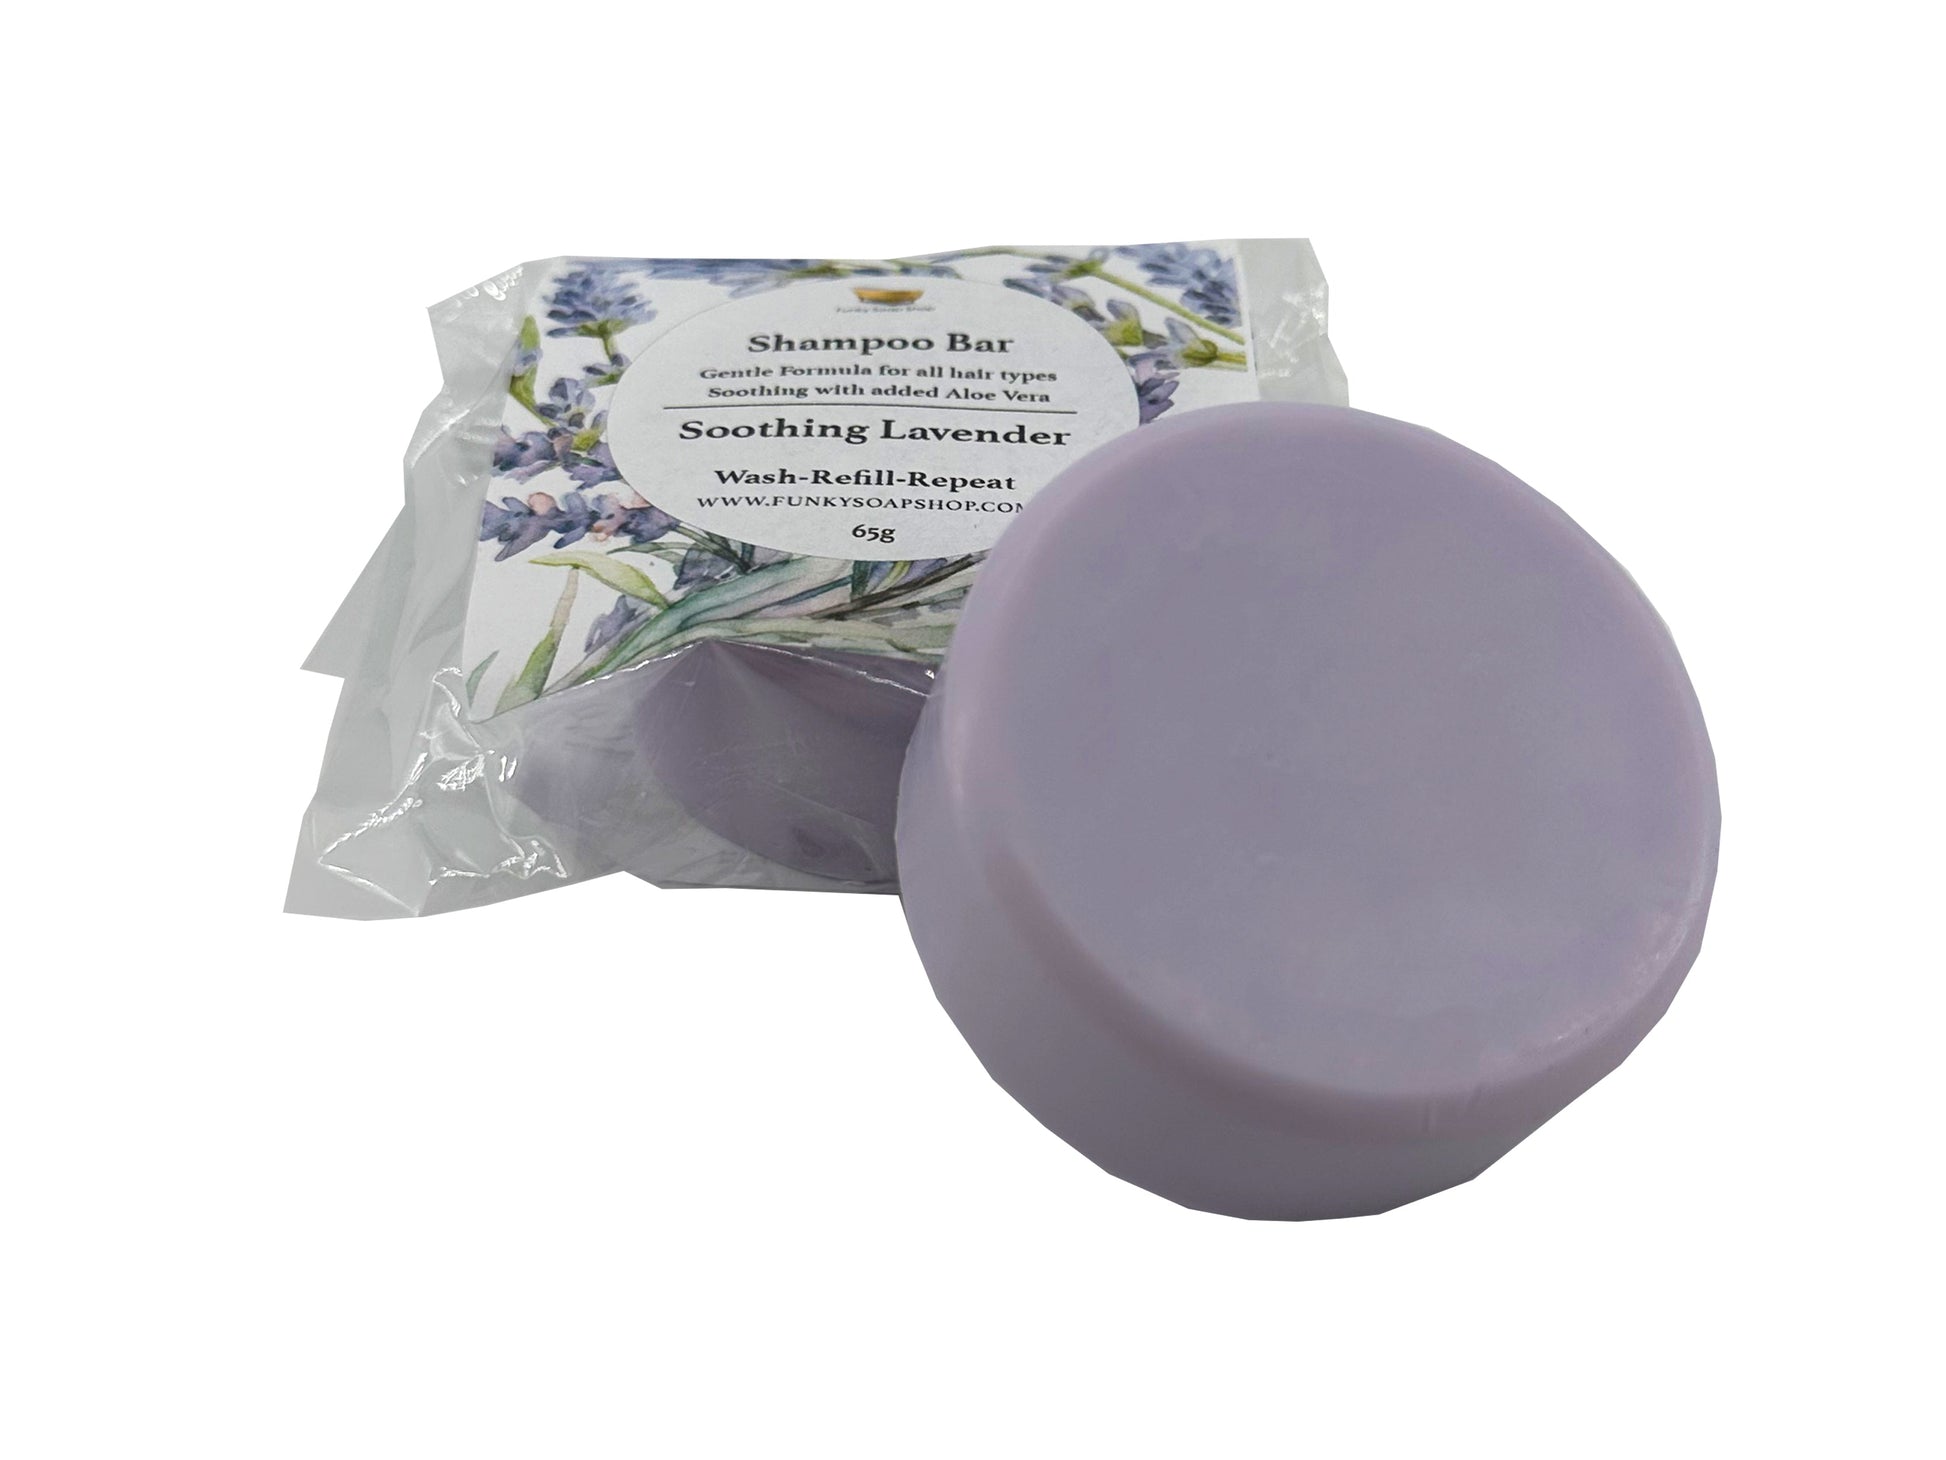 Wash Refill Repeat - Choice of Shampoo Bars in 6 gorgeous scents with optional Travel Tin, 65g - Funky Soap Shop